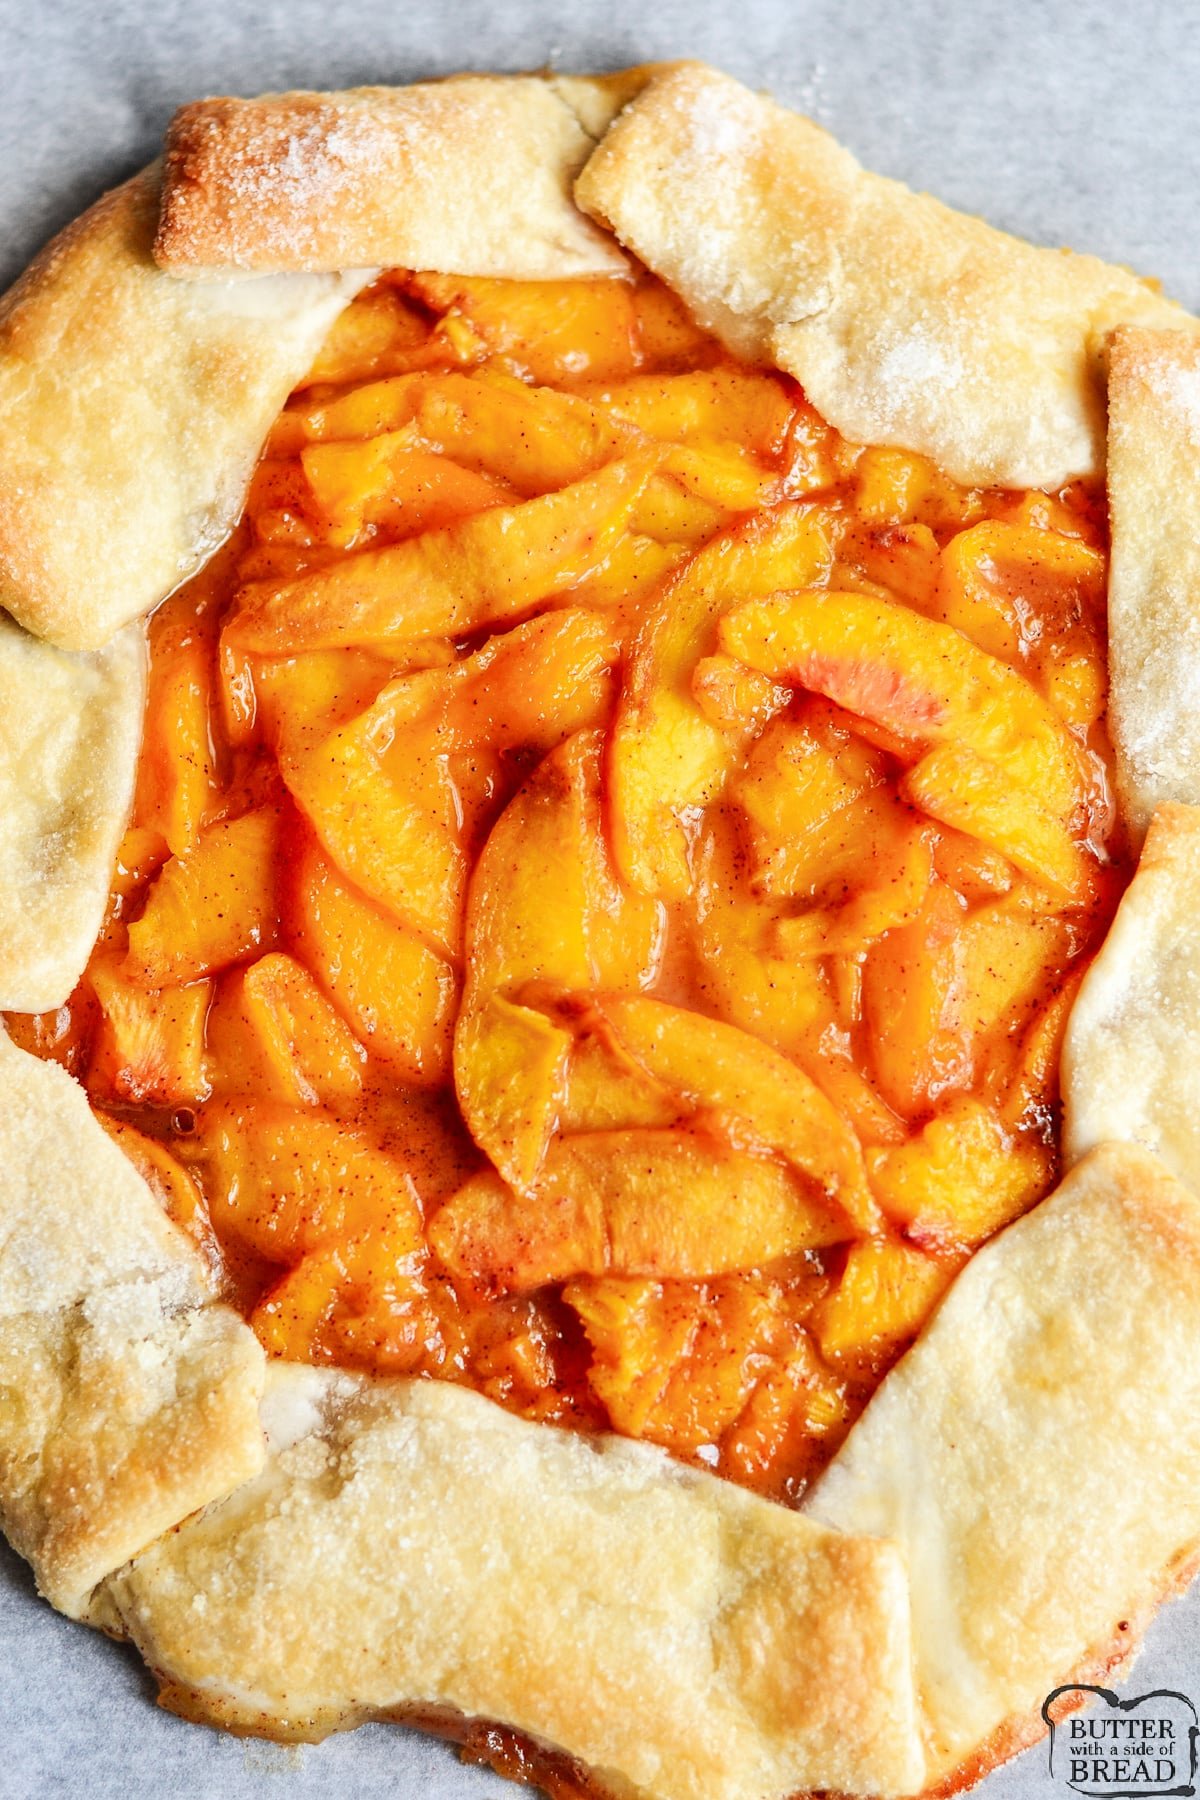 Easy Peach Galette made with fresh peaches and a simple pie crust recipe. Simple peach dessert that tastes even better with a scoop of vanilla ice cream!